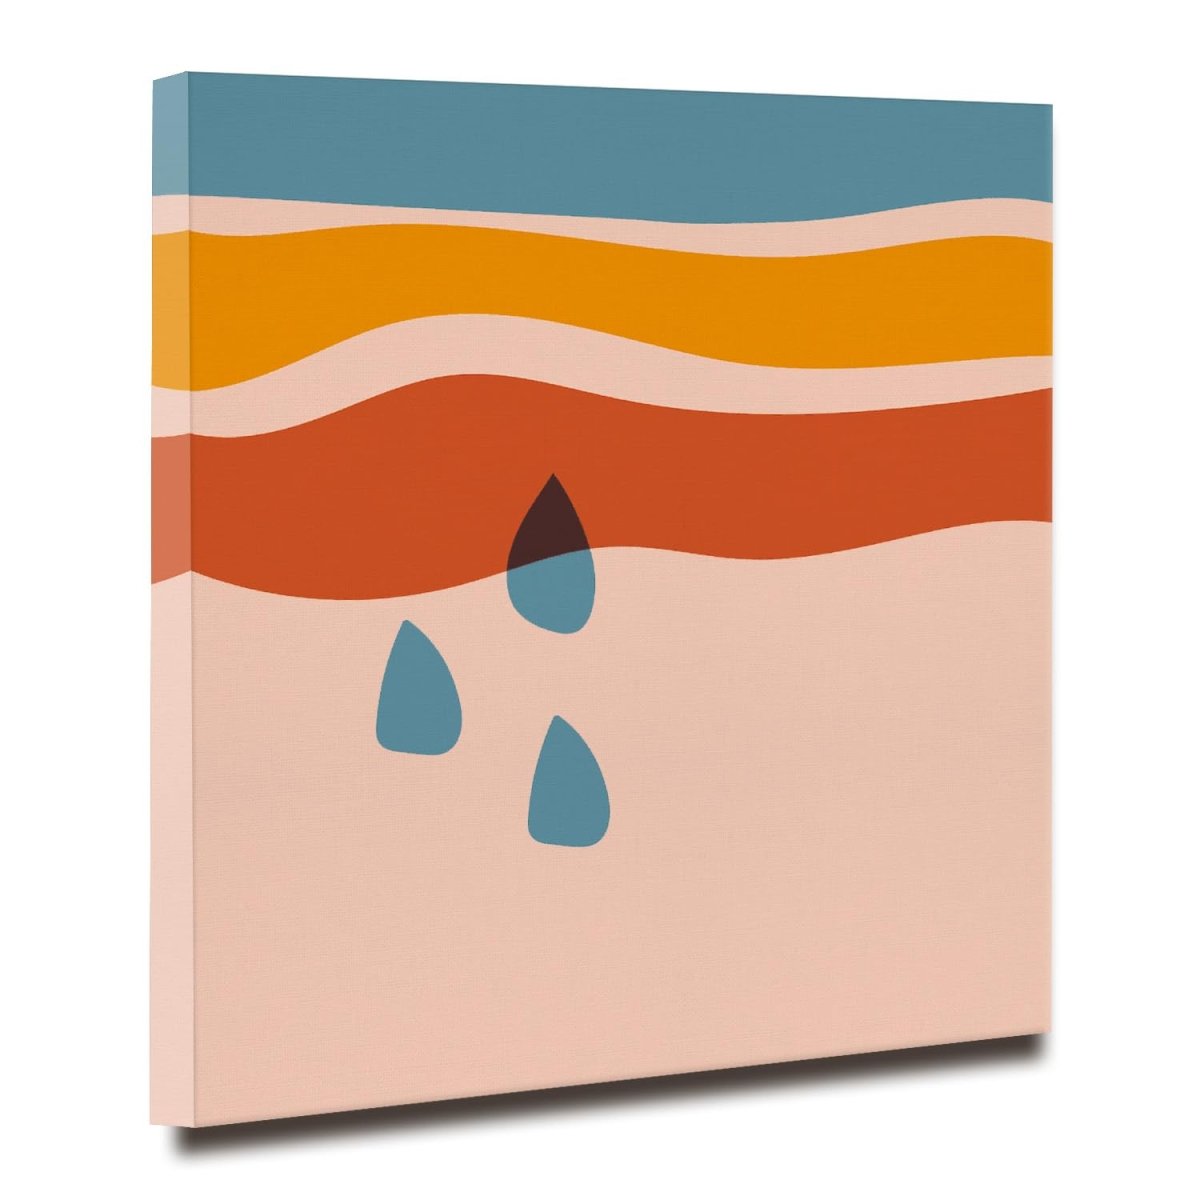 Teardrops on Canvas Wall Painting (36 x 36 Inches)